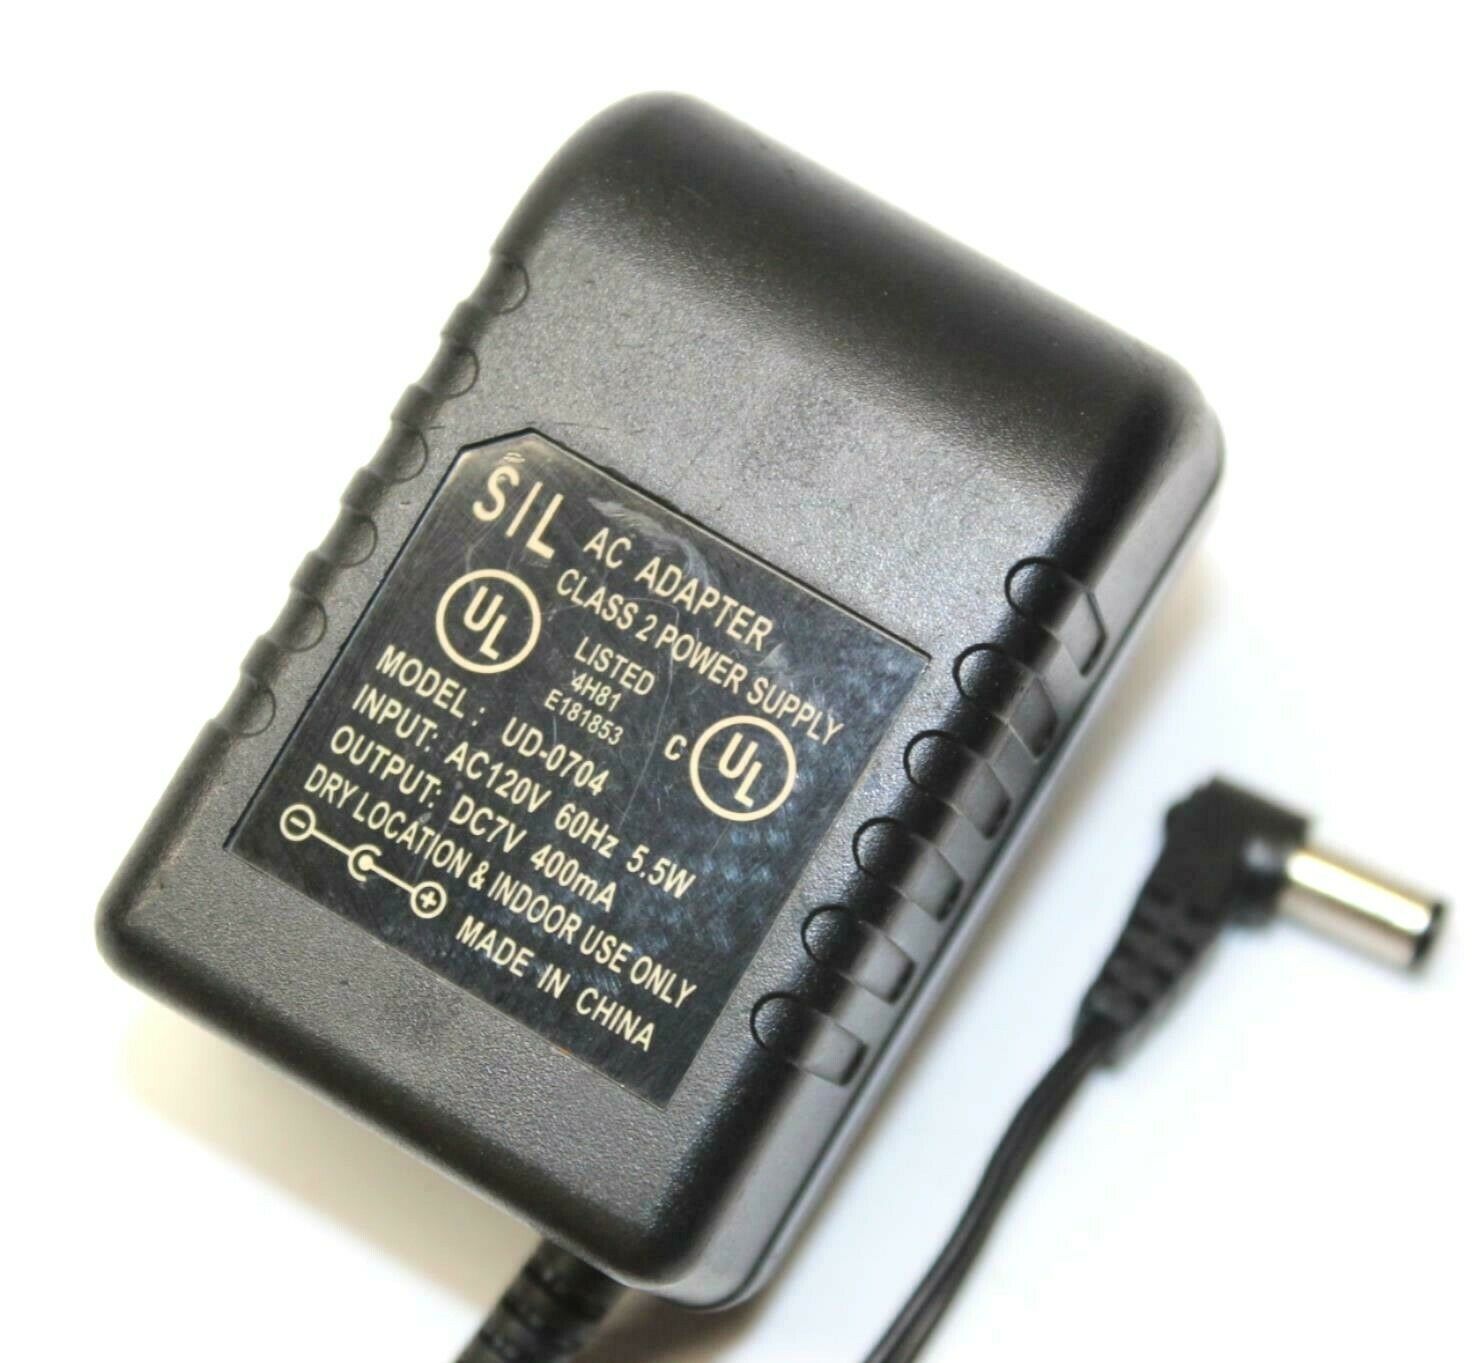 New 7V 400mA SIL UD-0704 Class 2 Transformer Power Supply Ac Adapter